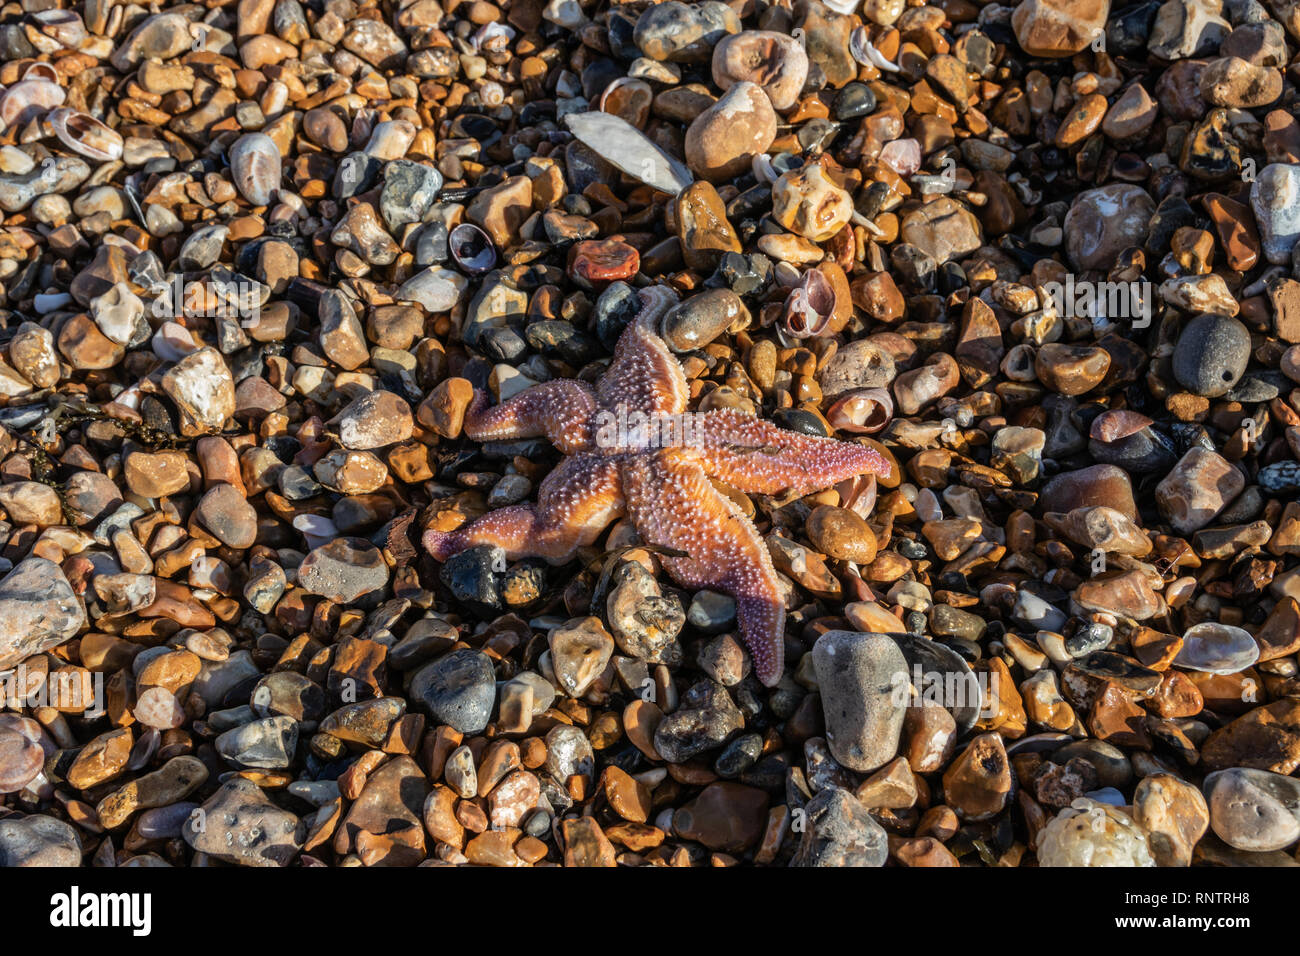 Star fish washed up on a pebble beach Stock Photo